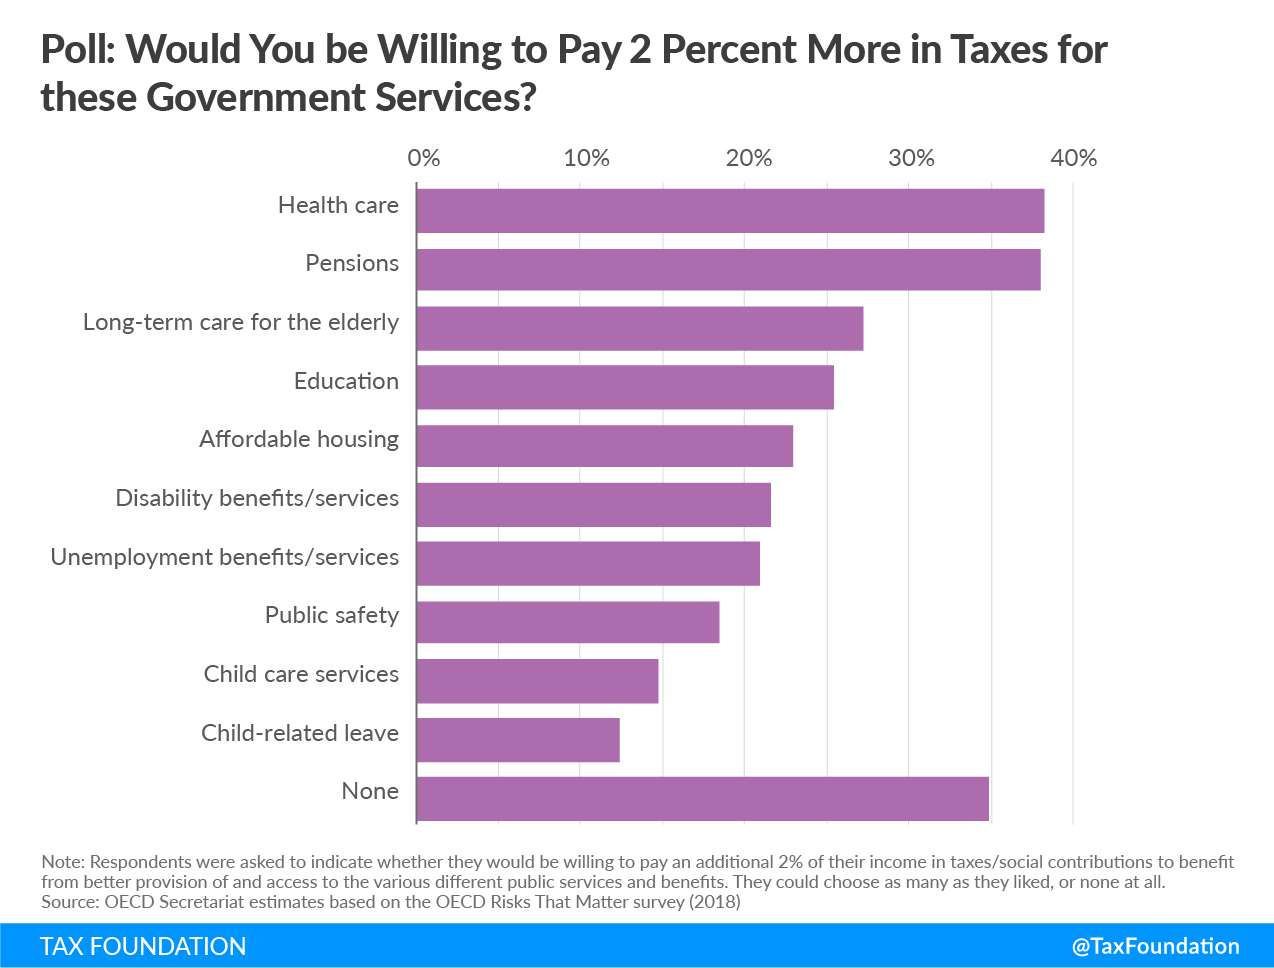 would you be willing to pay 2 percent more in taxes for these government services?